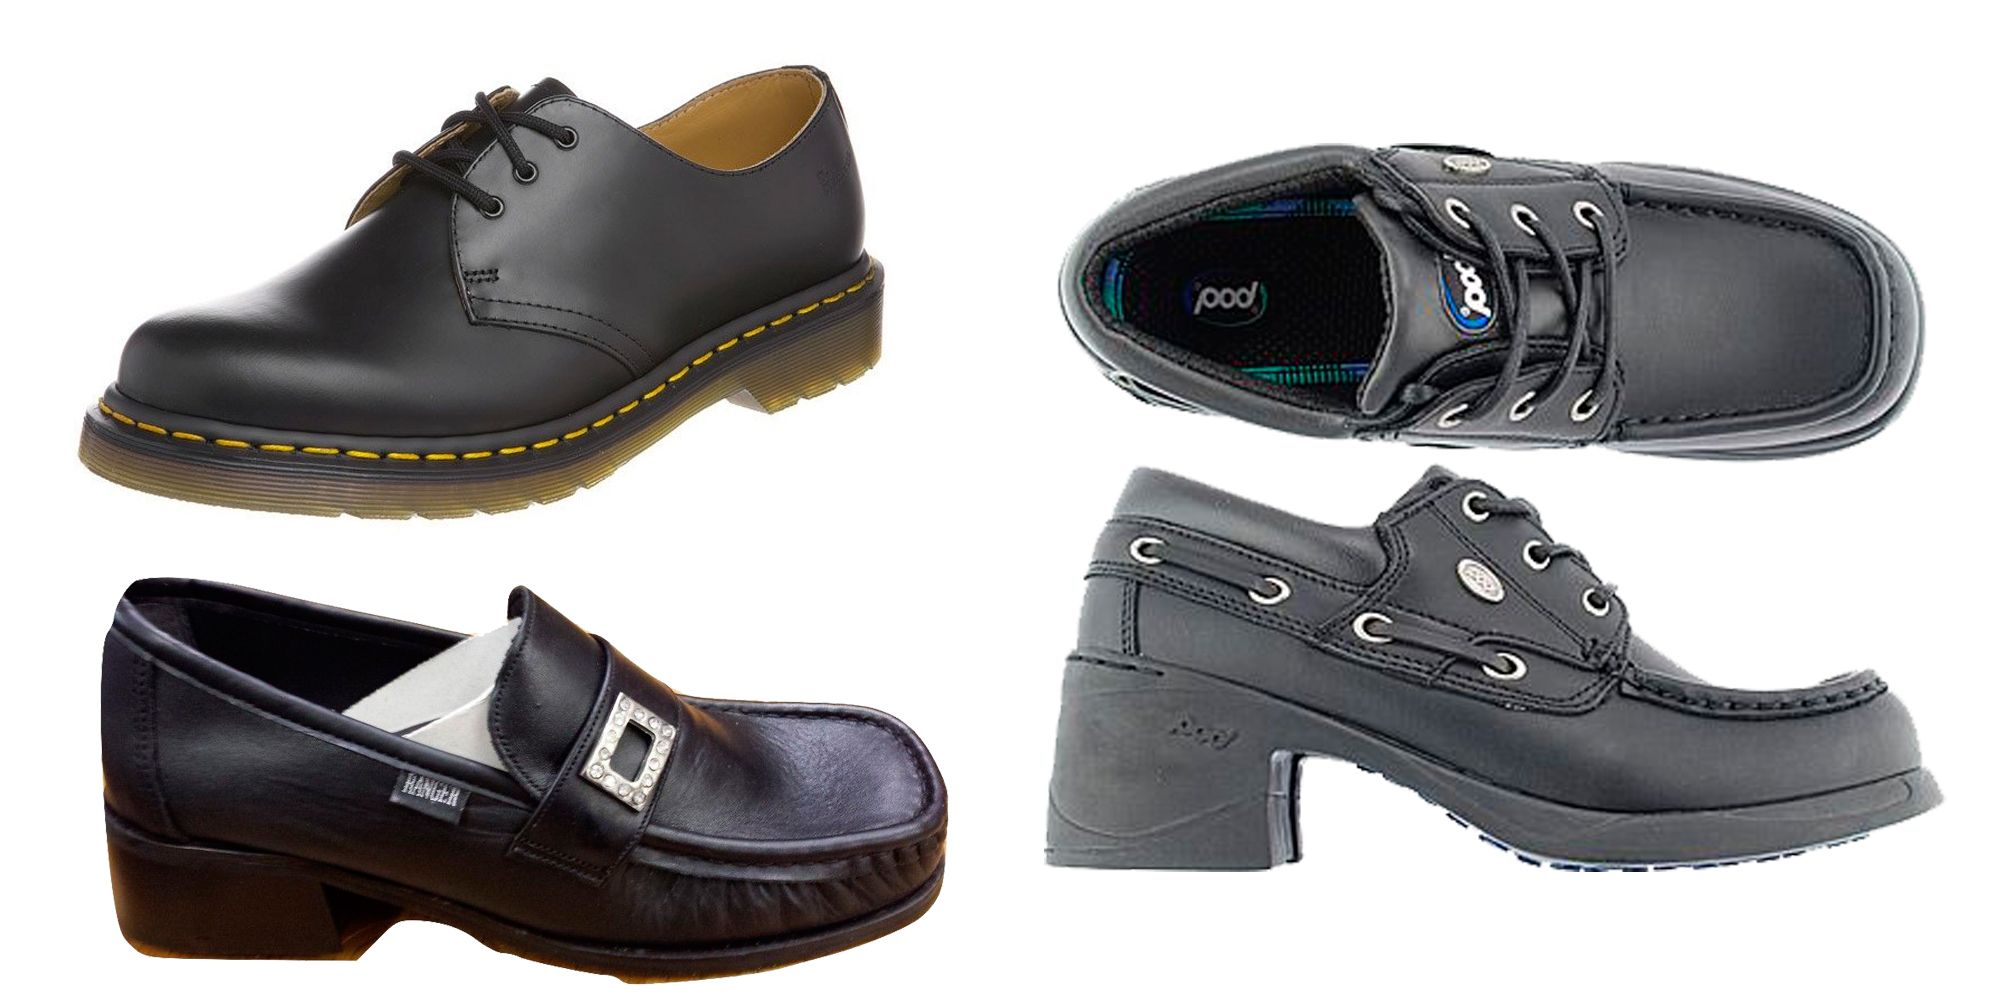 Back to School Shoes for Boys & Girls | Clarks UK